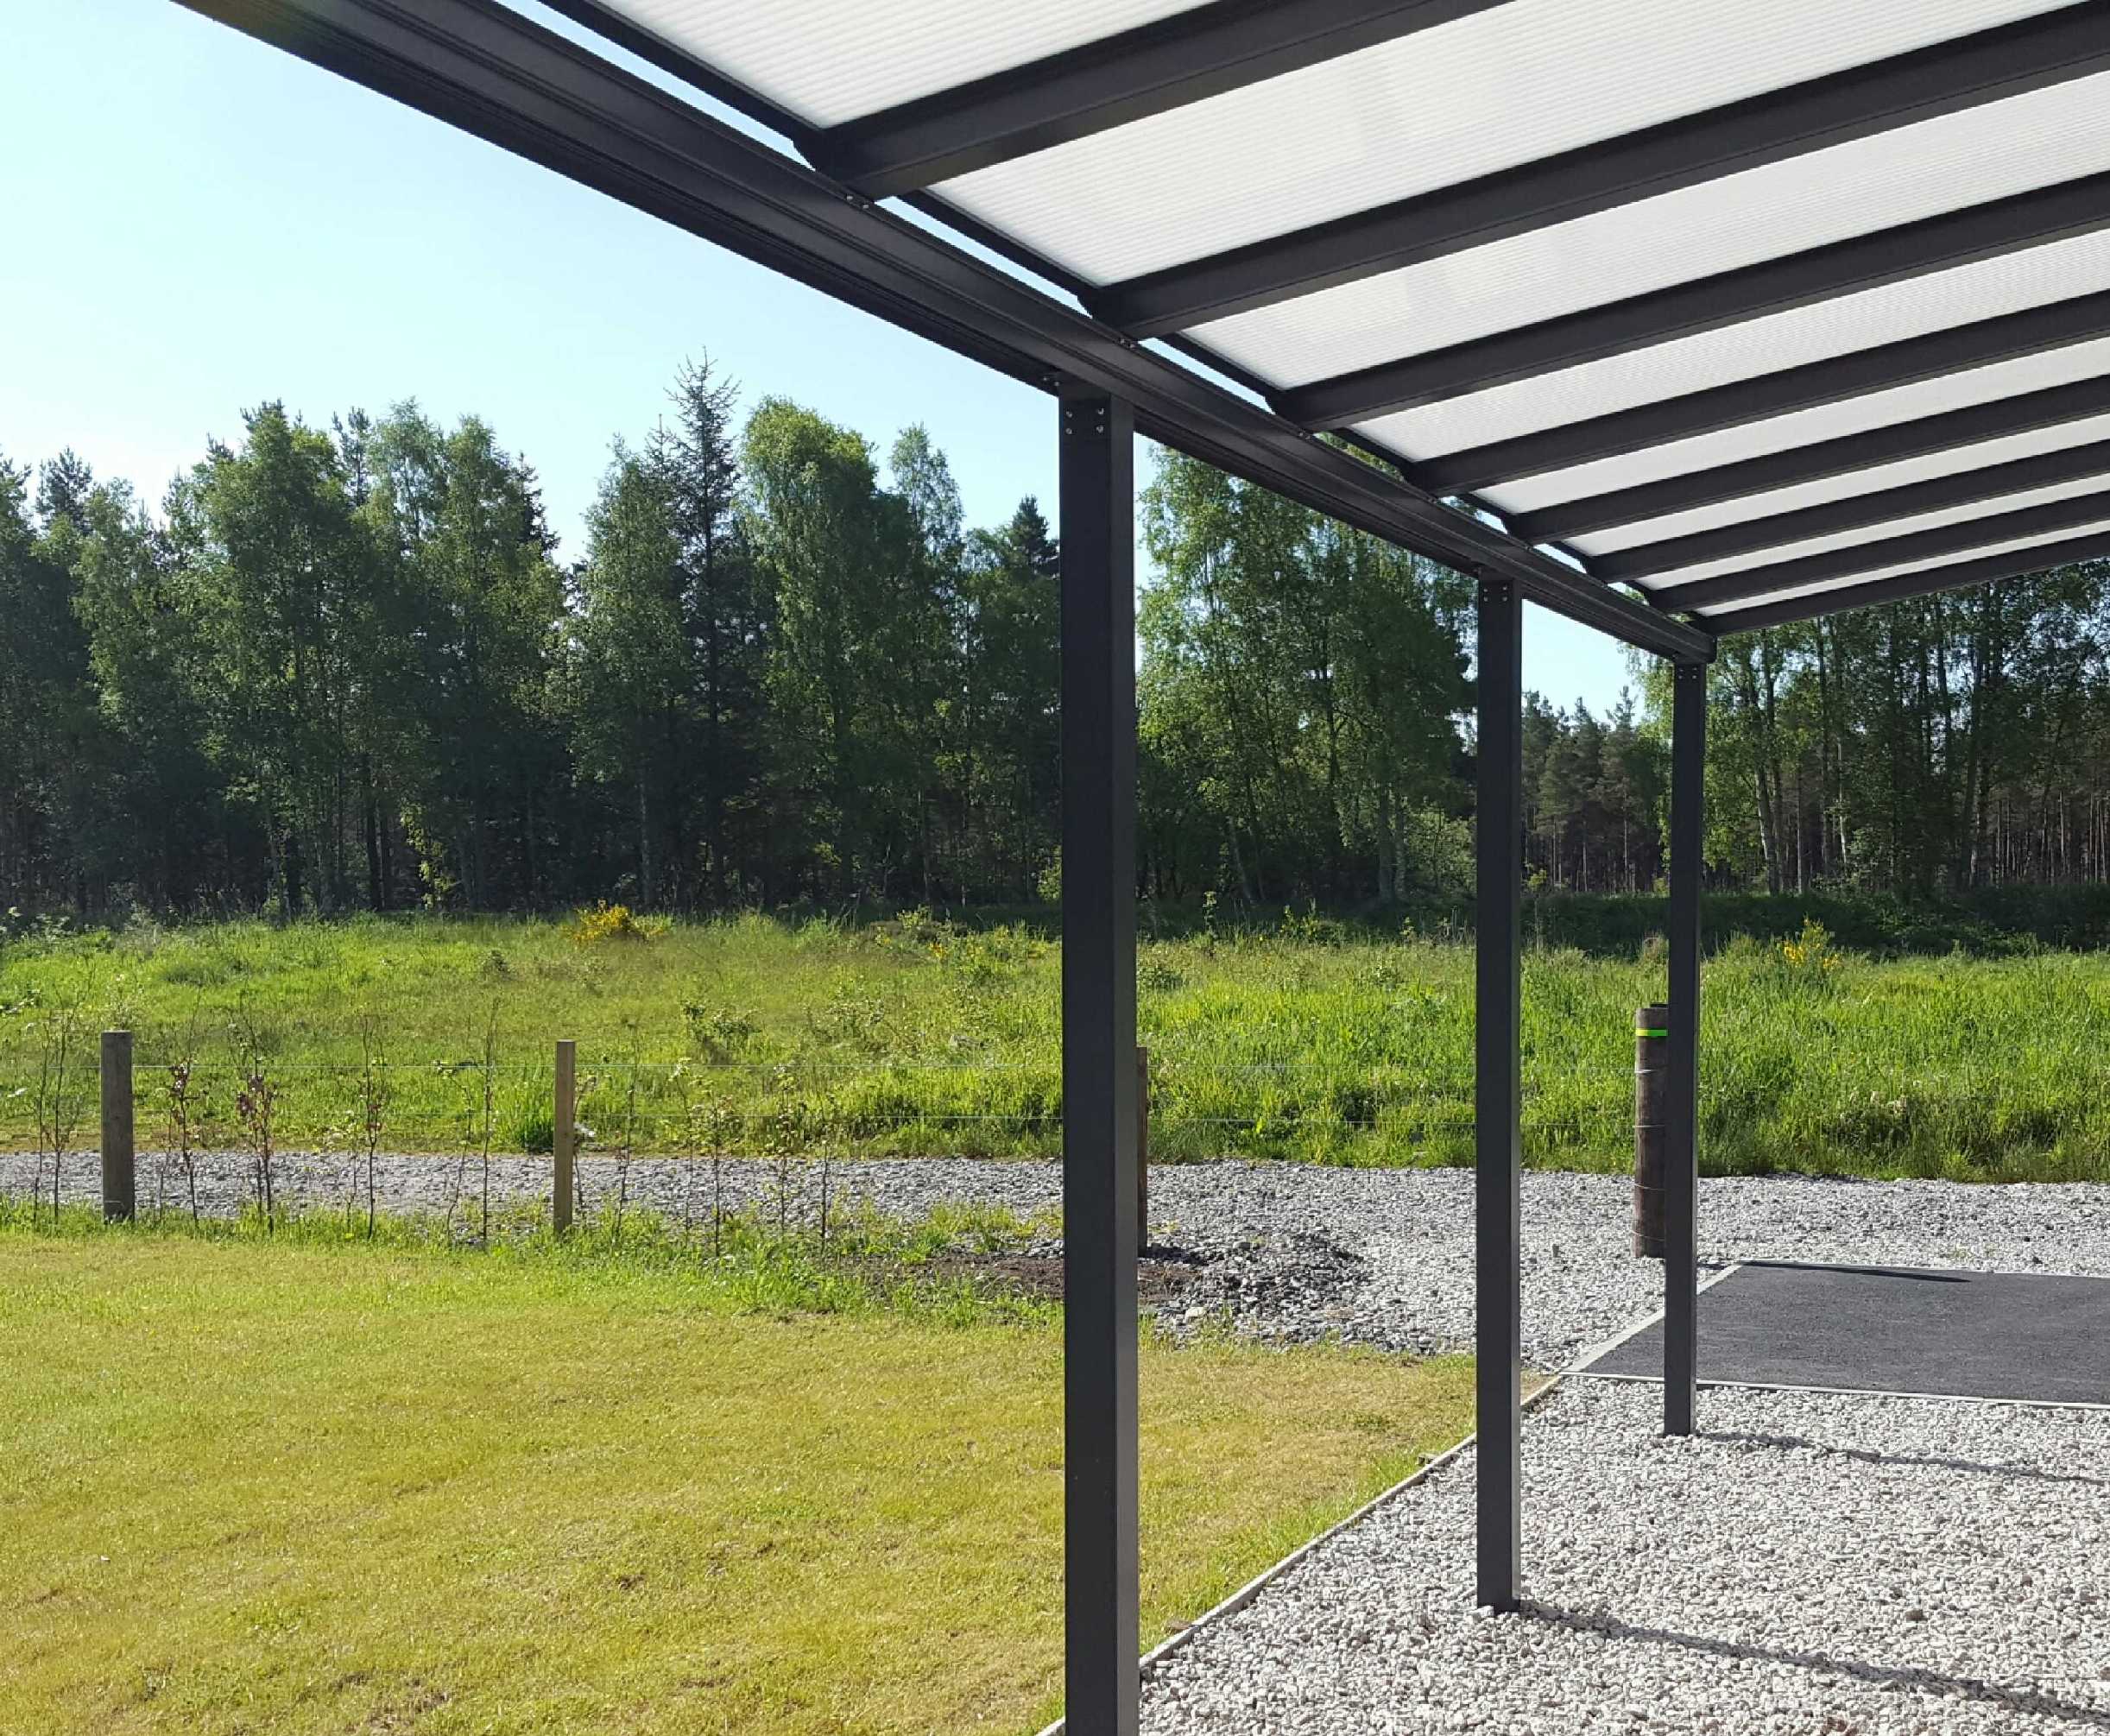 Omega Smart Lean-To Canopy, Anthracite Grey, 6mm Glass Clear Plate Polycarbonate Glazing - 10.5m (W) x 1.5m (P), (5) Supporting Posts